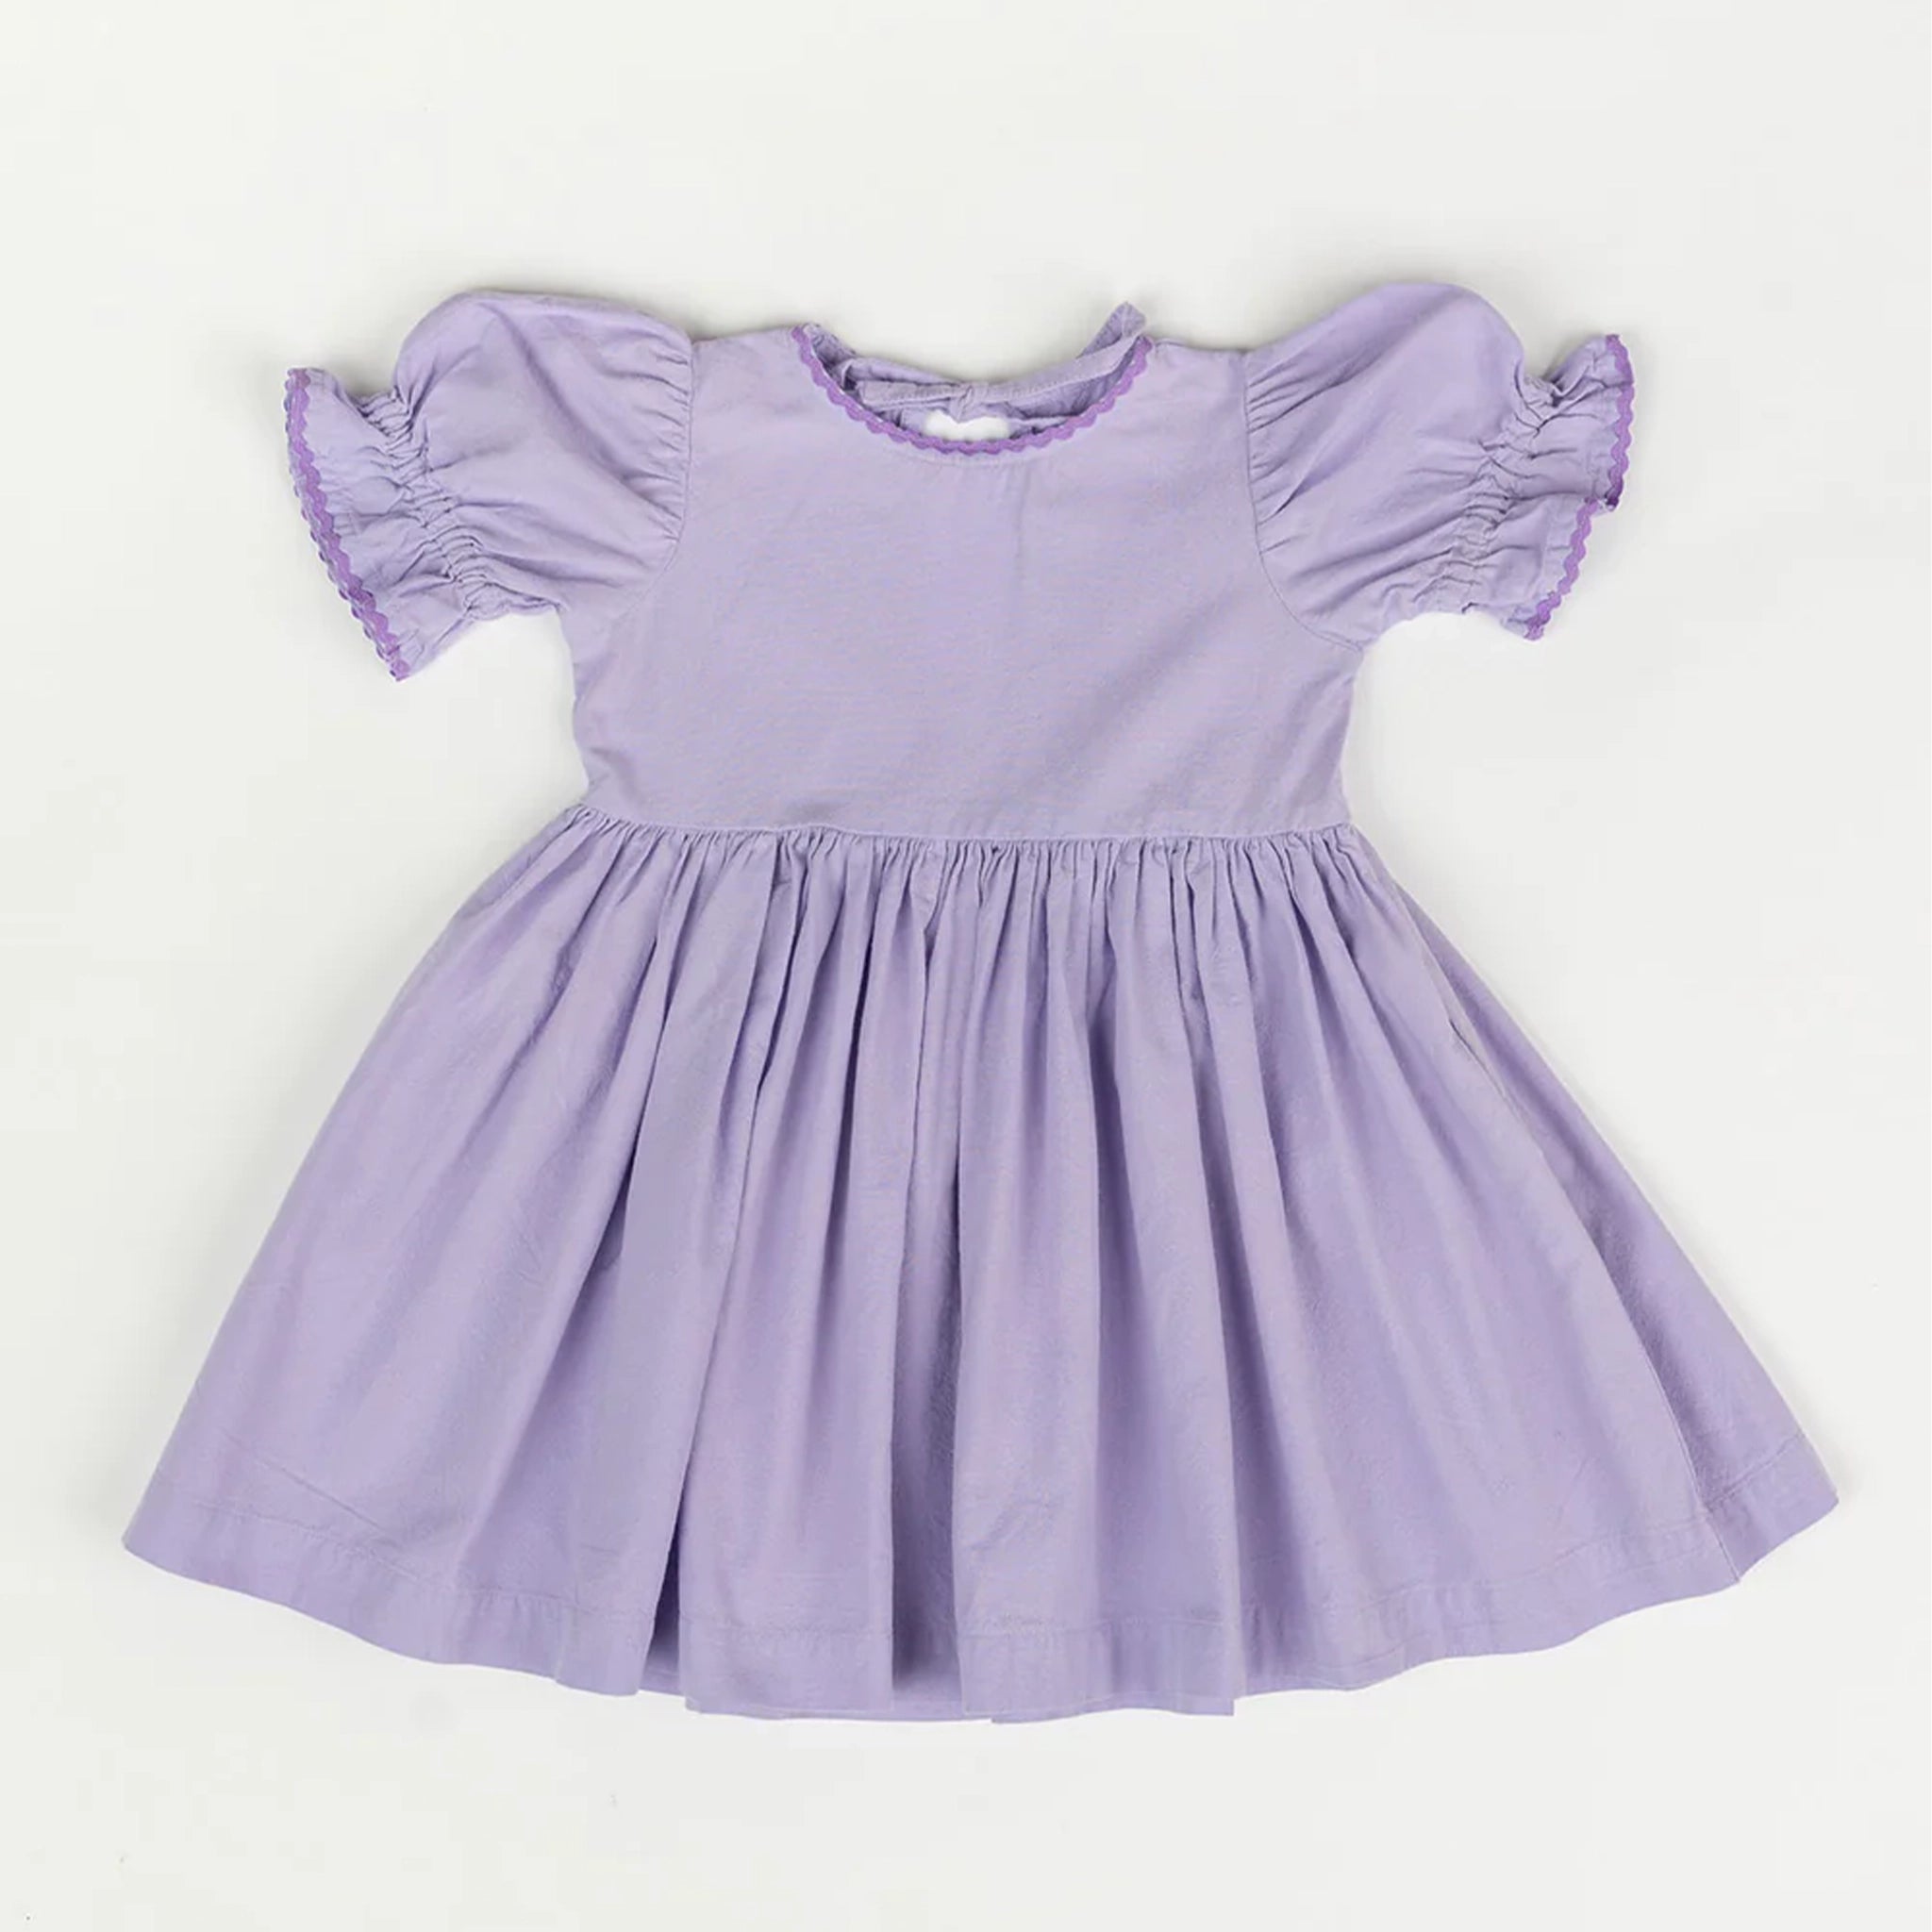 A lavender baby doll style dress with puff sleeves and a flowy skirt laying flat on a white background. 